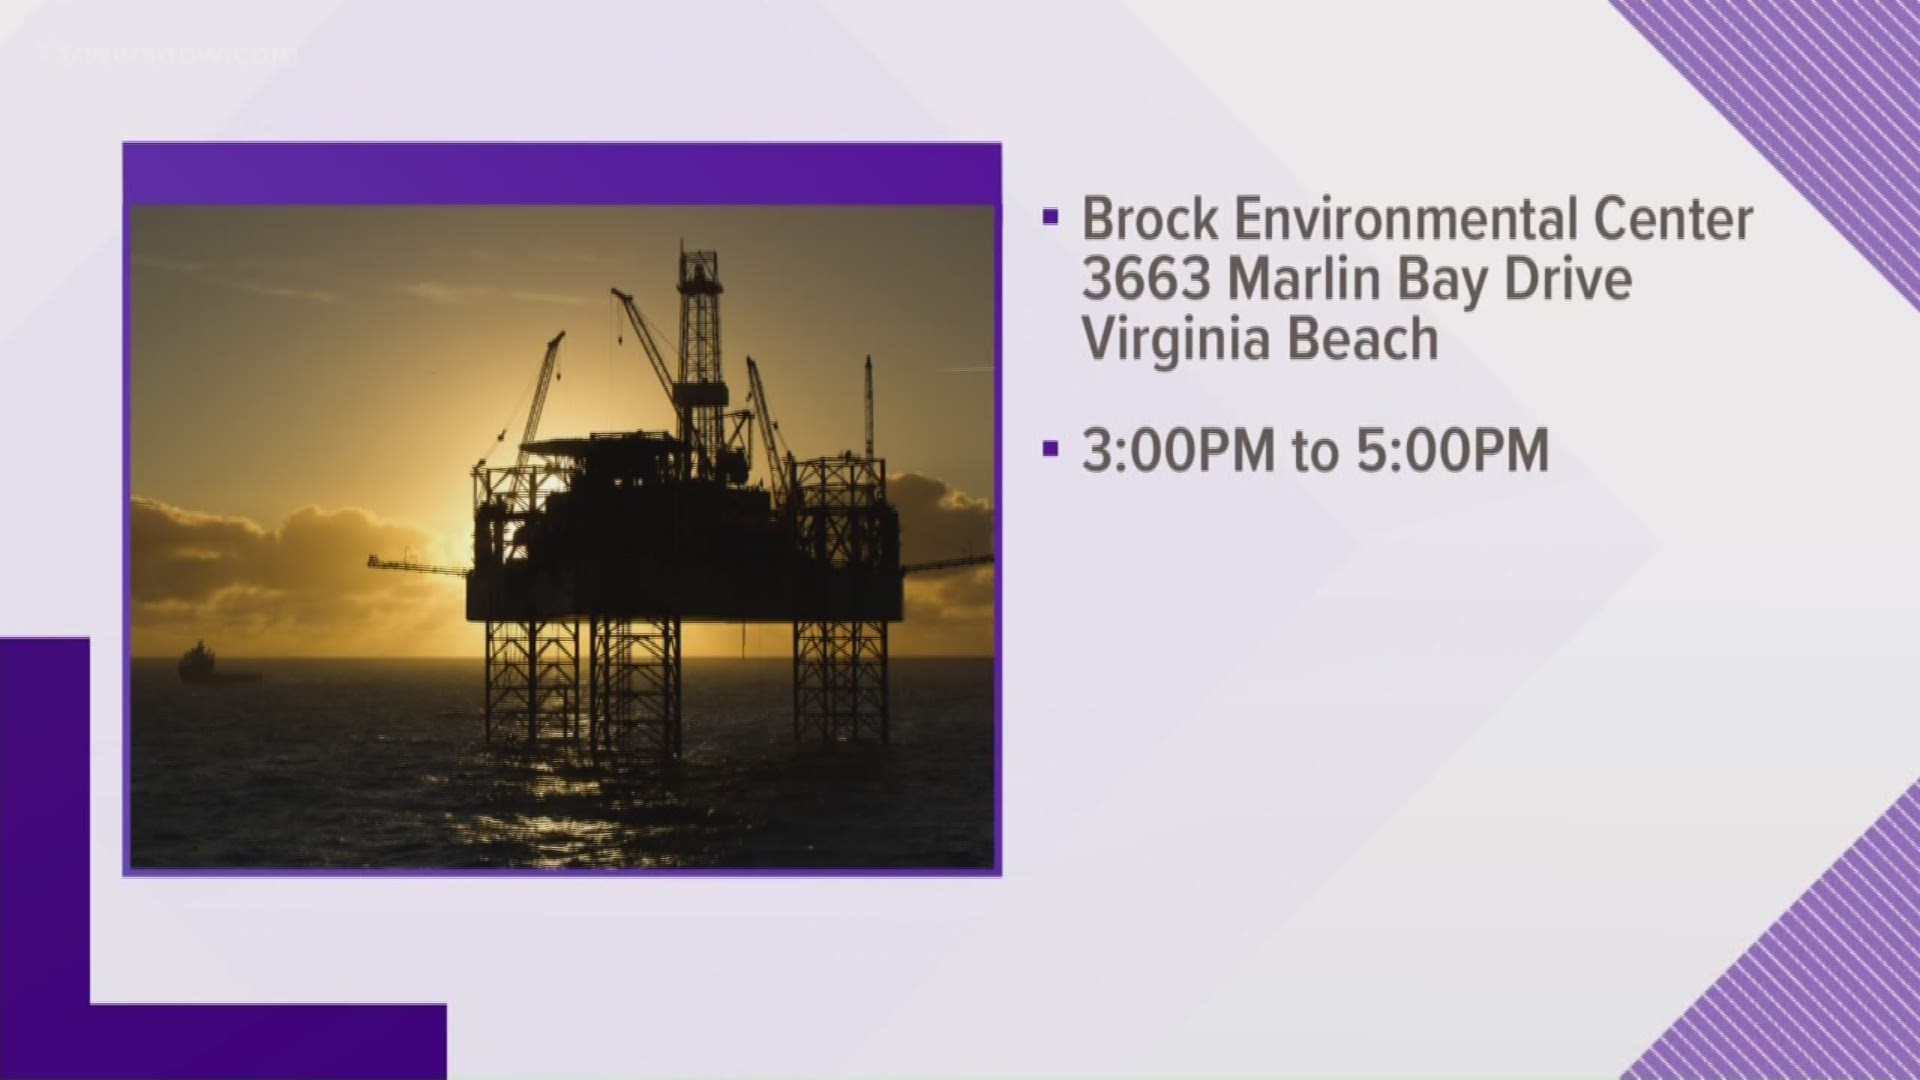 Community leaders will be at the town hall meeting about offshore drilling. The Chesapeake Bay Foundation is holding the meeting at the Brock Environmental Center.